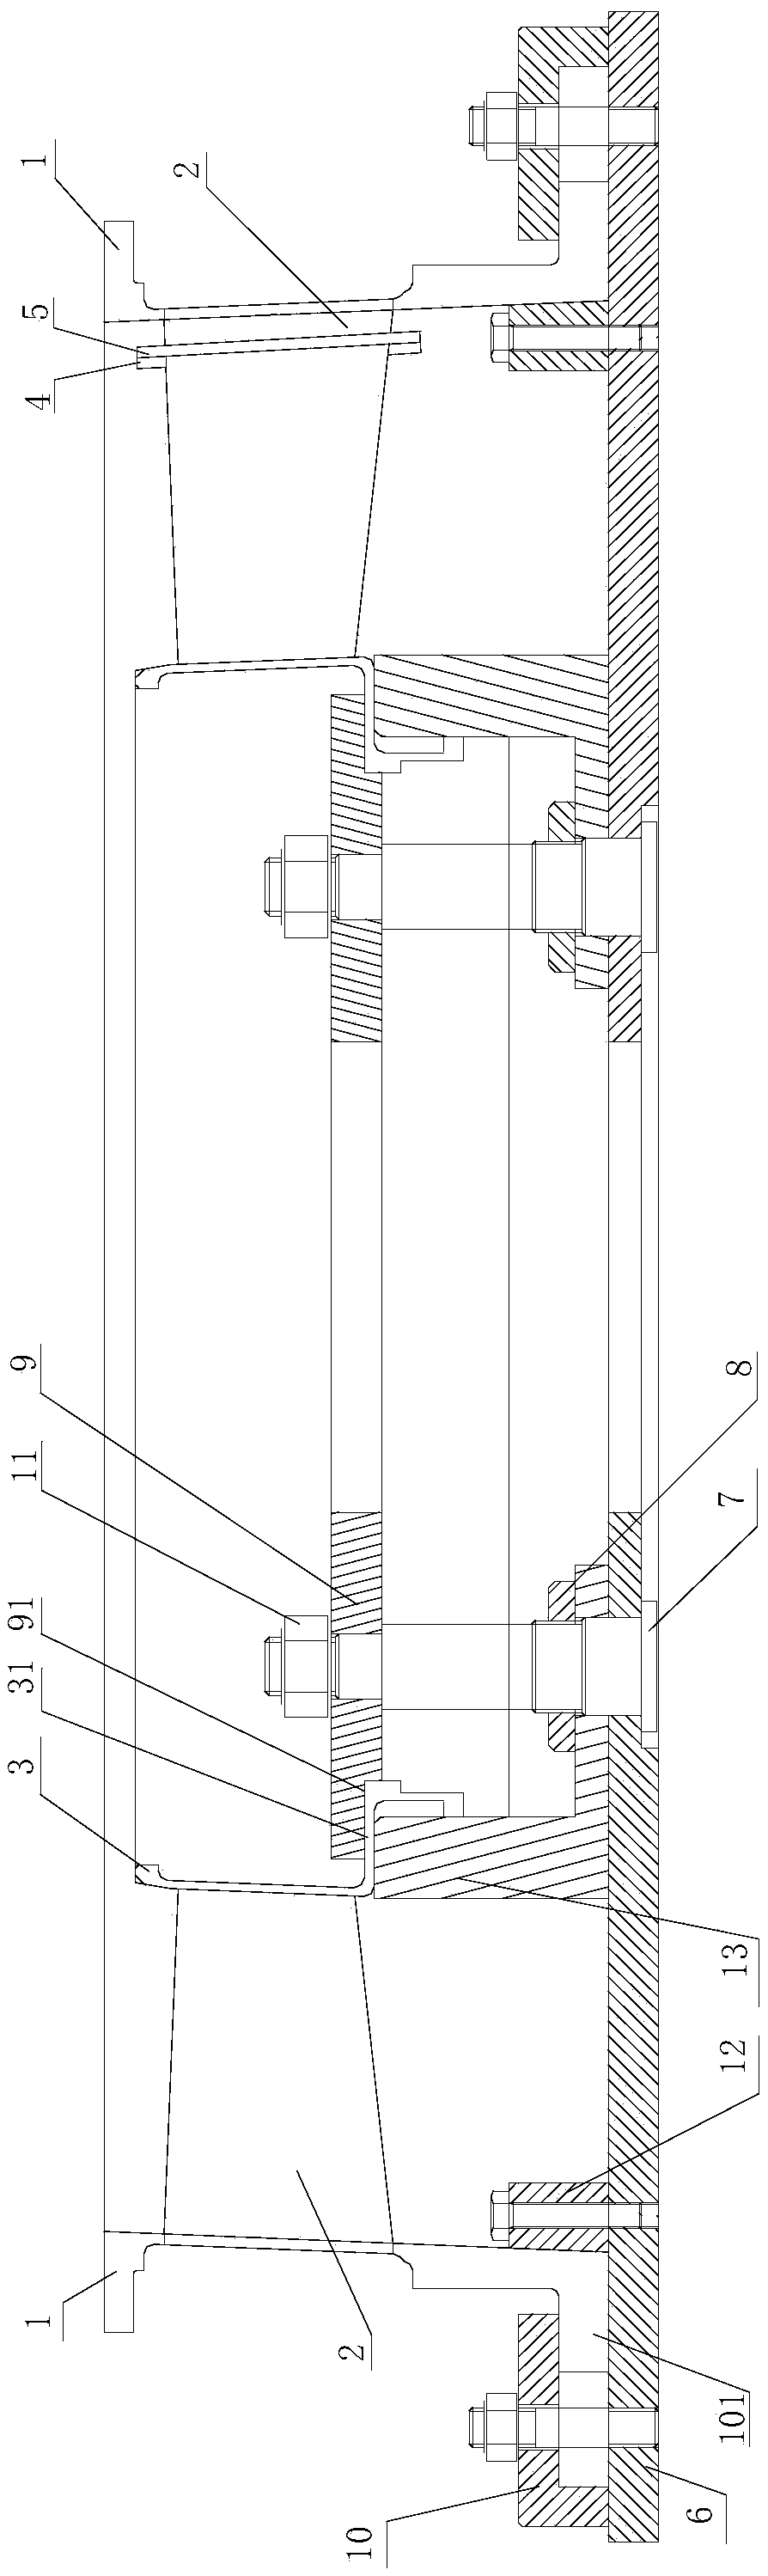 Welding processing method and tooling for fan case assembly